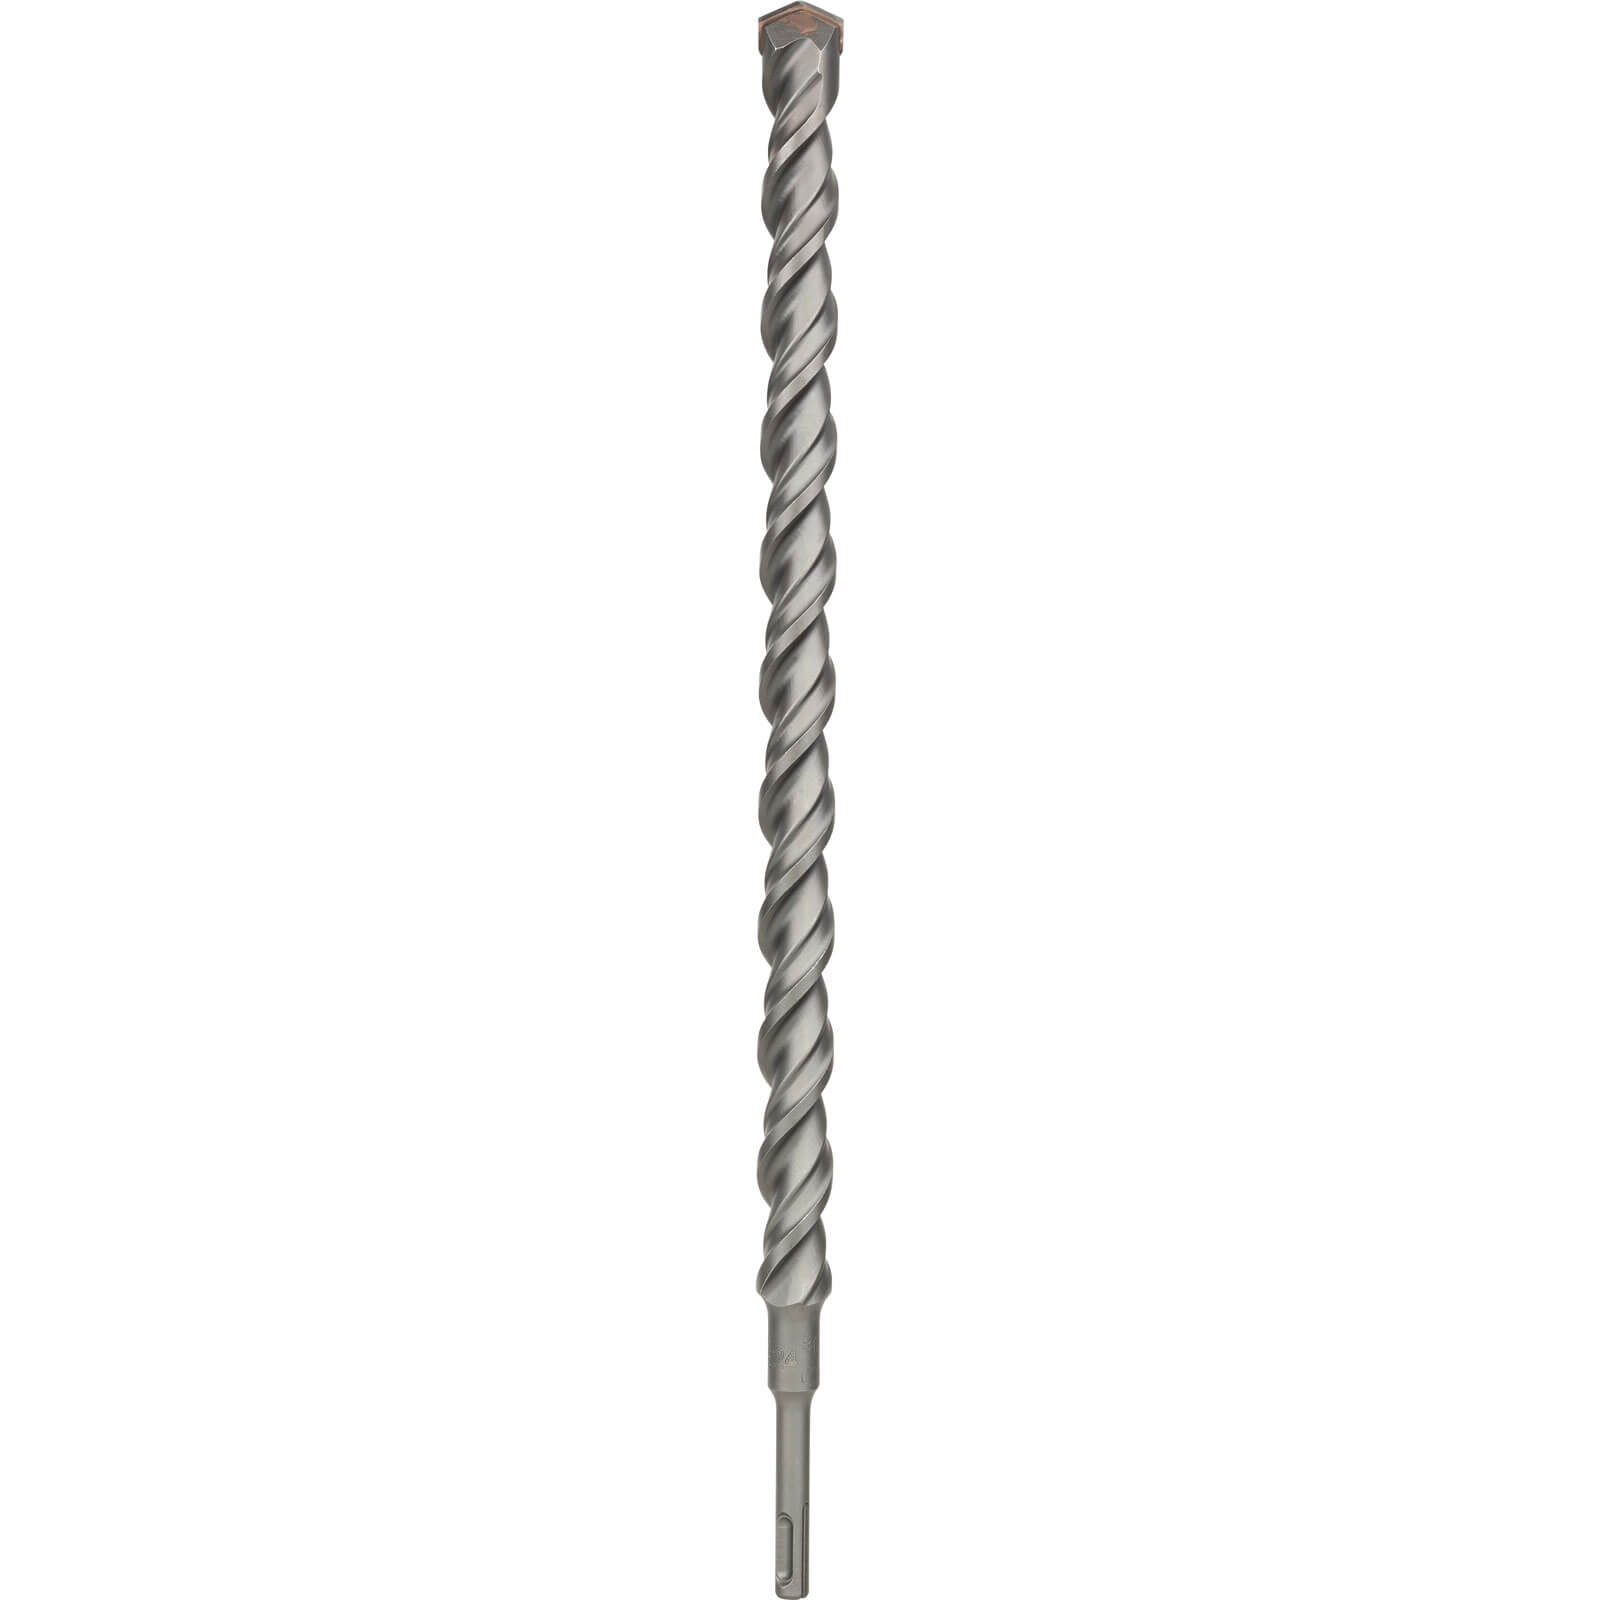 Image of Bosch Series 3 SDS Plus Masonry Drill Bit 24mm 450mm Pack of 1